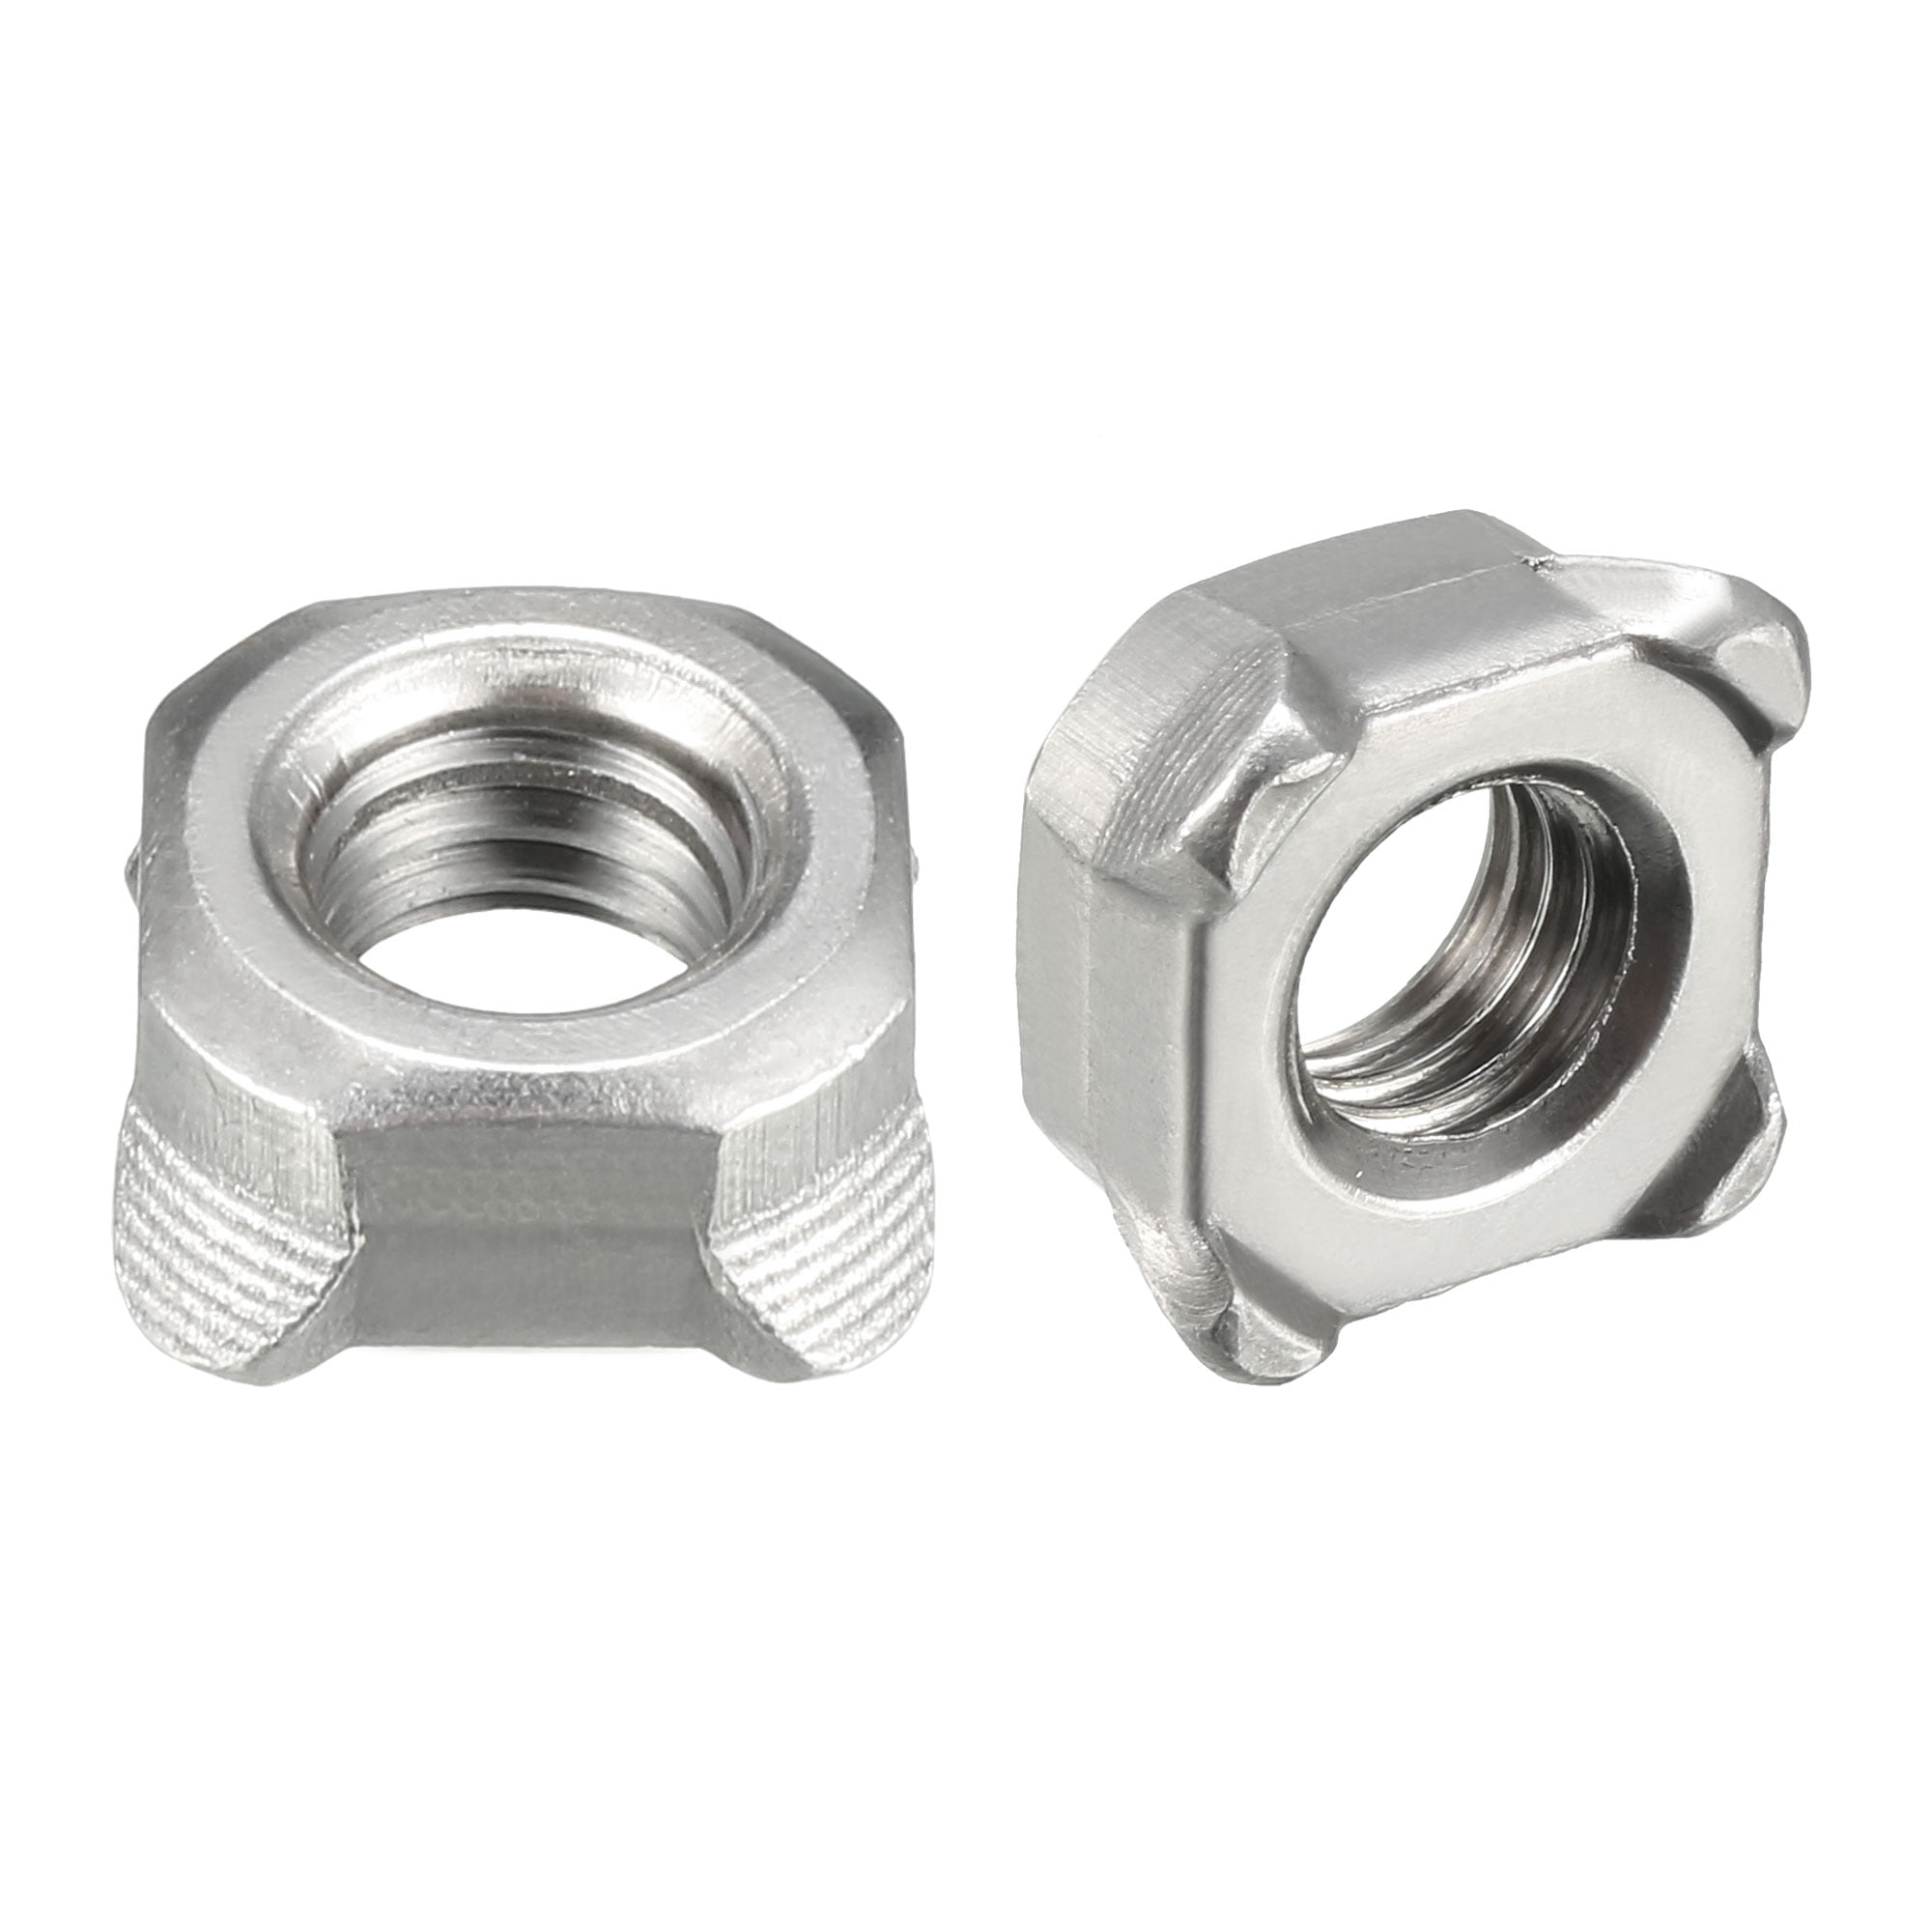 square nuts metric 10mm x 1.25mm pitch  weld nuts 